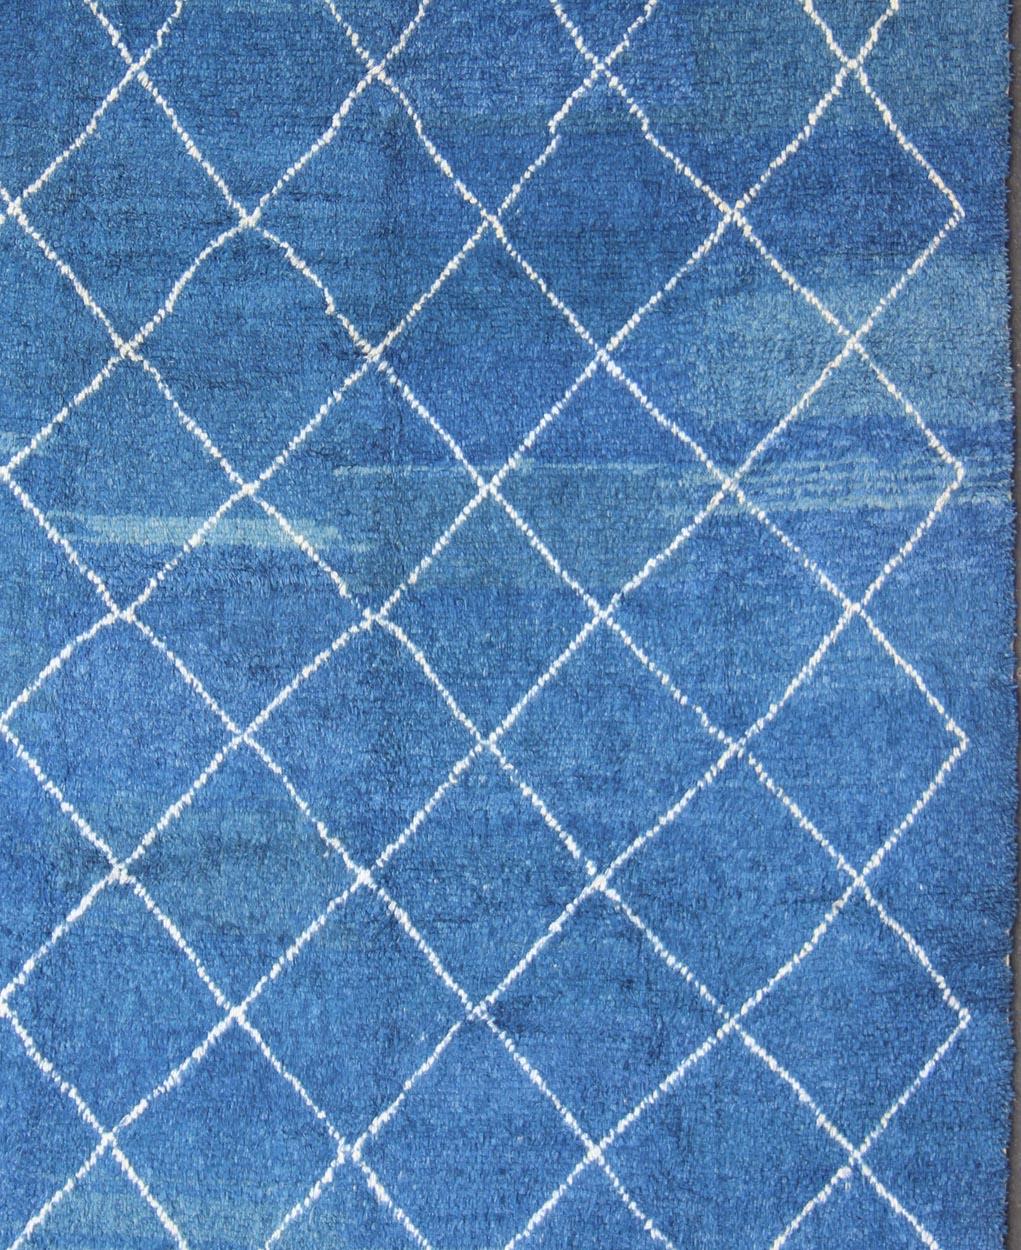 Modern Moroccan rug with all-over Lattice design in cream and gray, rug TU-ALG-27, country of origin / type: Turkey / Tribal

This tribal Moroccan/Tulu rug with a modern design rendered in a lattice pattern, features blue and cream pattern. This